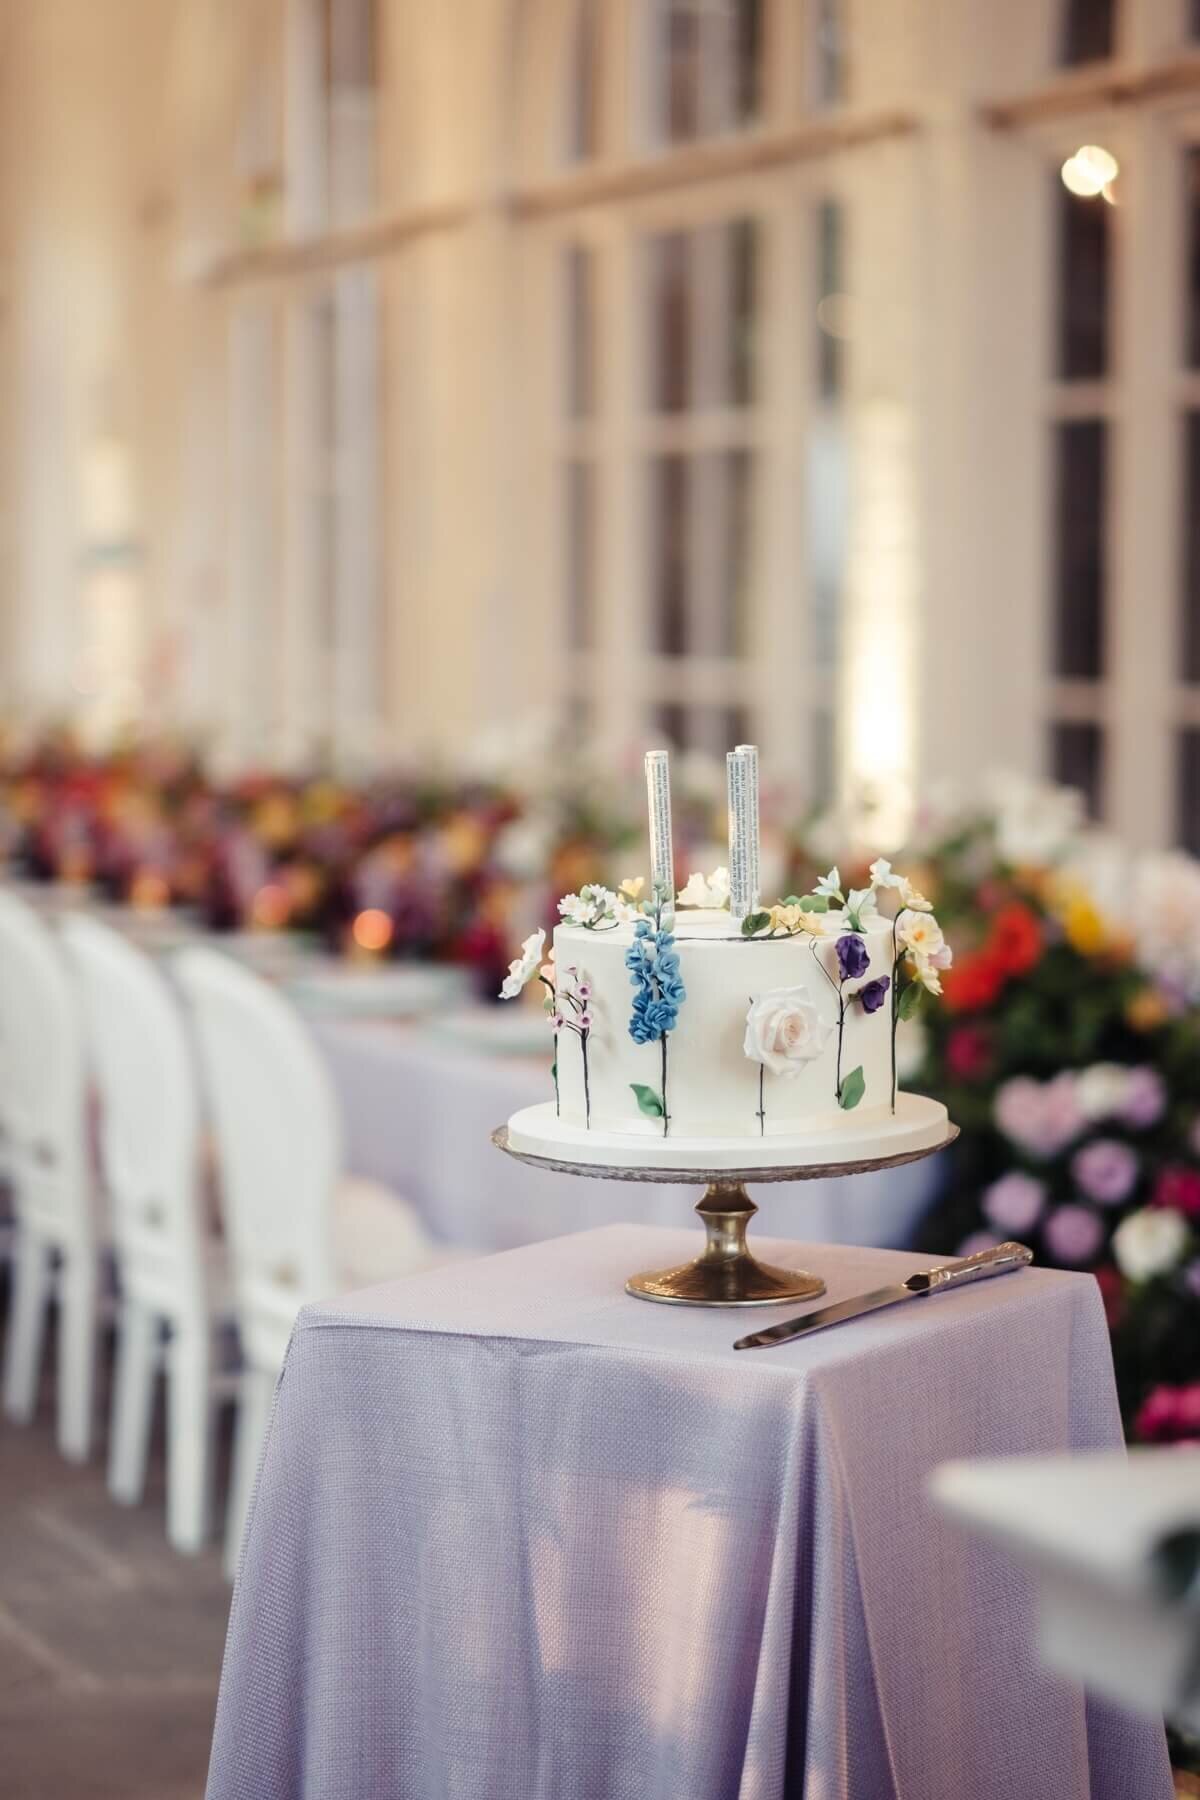 A cake with hand painted flower stems on the sides and sugar flowers coming from the stems on the side of the cake